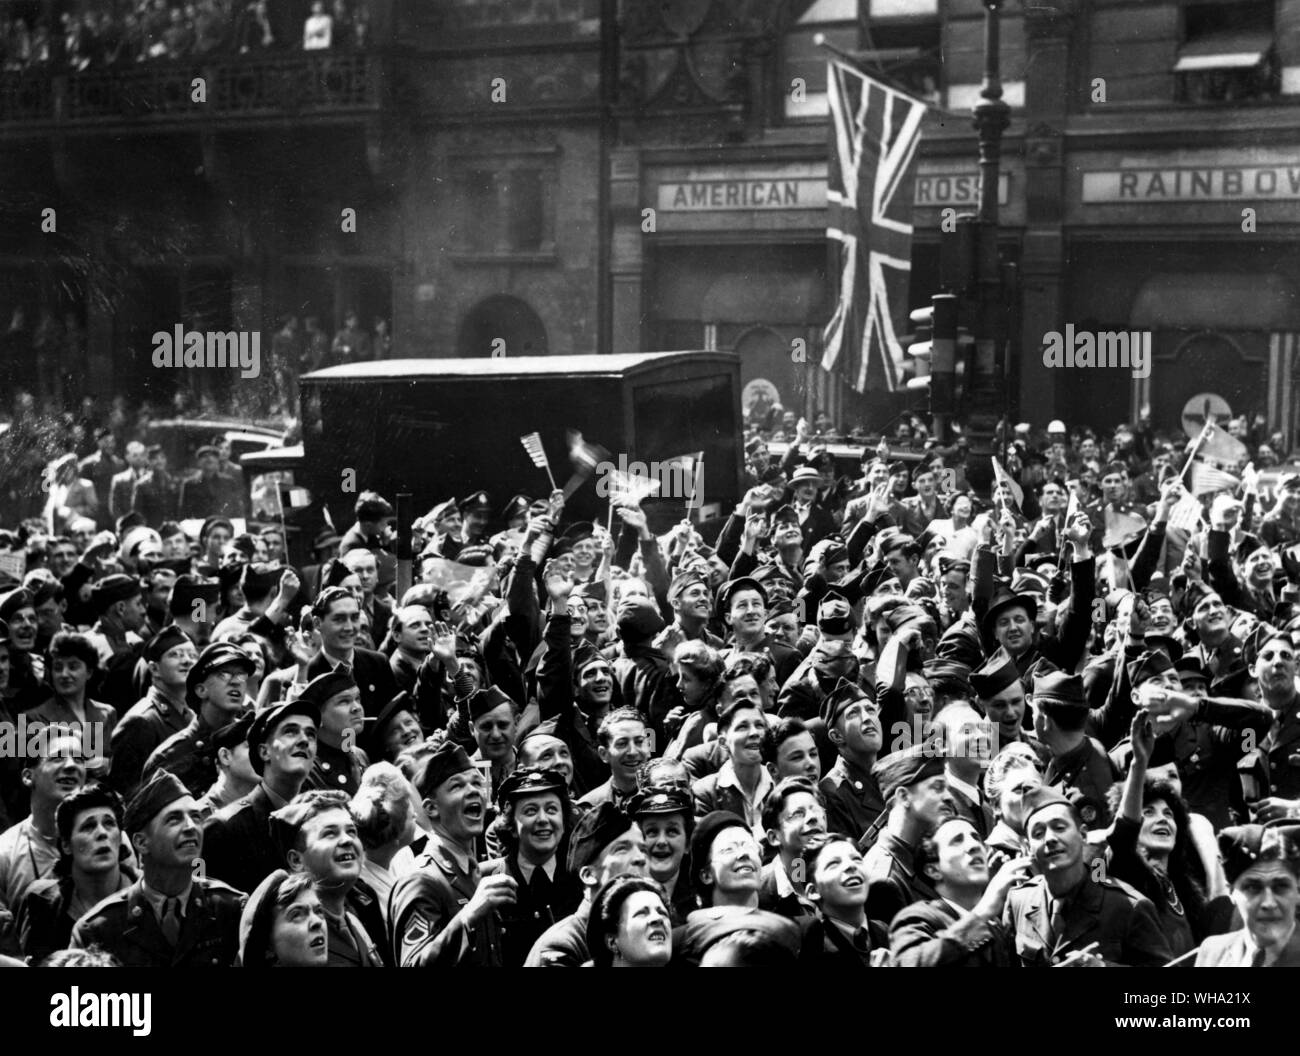 WW2: London/ A section of the huge crowds of civilians and allied servicemen and women gathered in Piccadilly Circus awaiting the final announcement of Germany's total surrender. 7th June 1945. Stock Photo